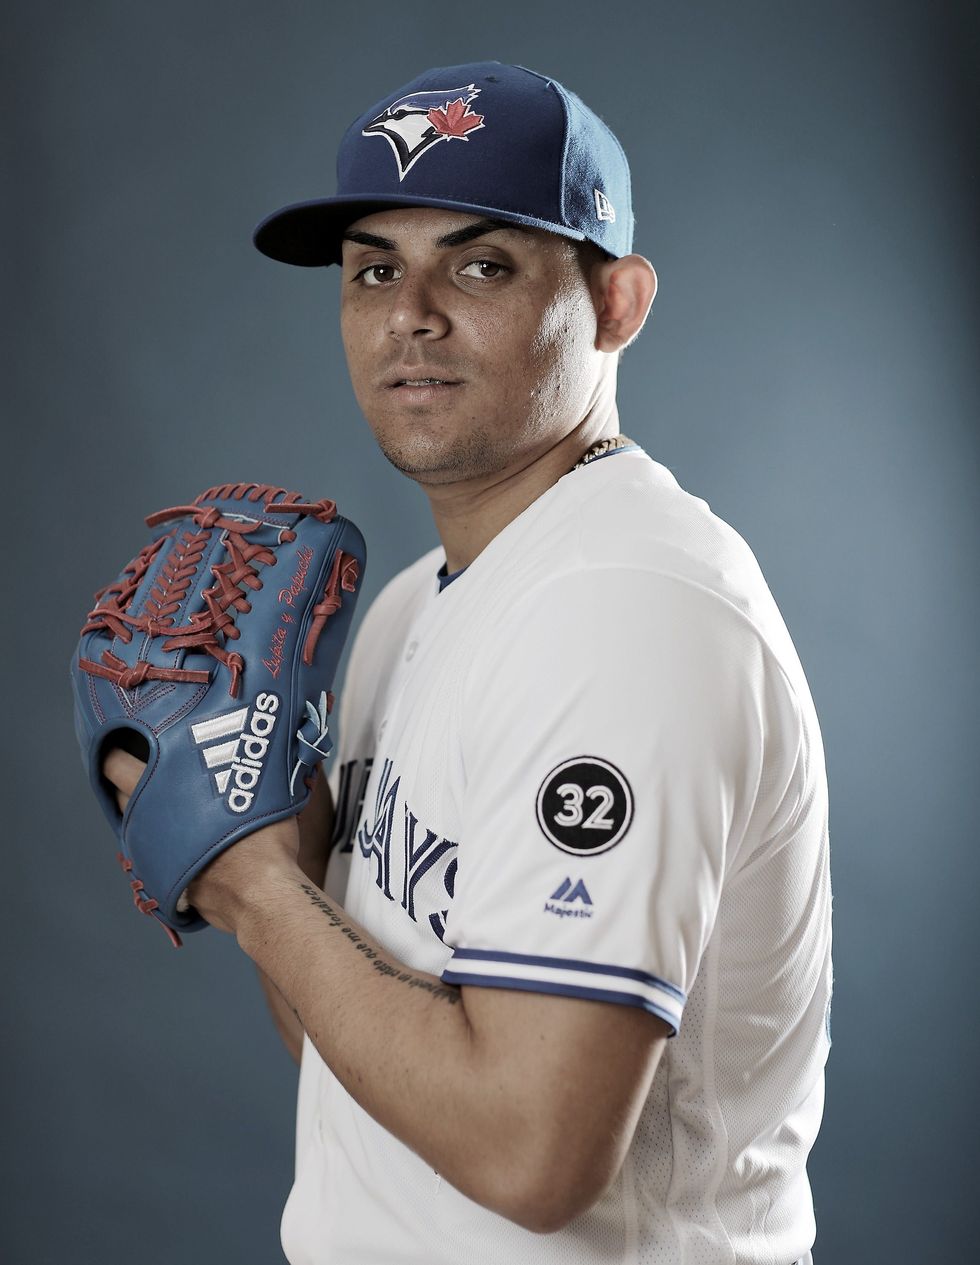 A look at what Osuna brings to the Astros from a baseball perspective